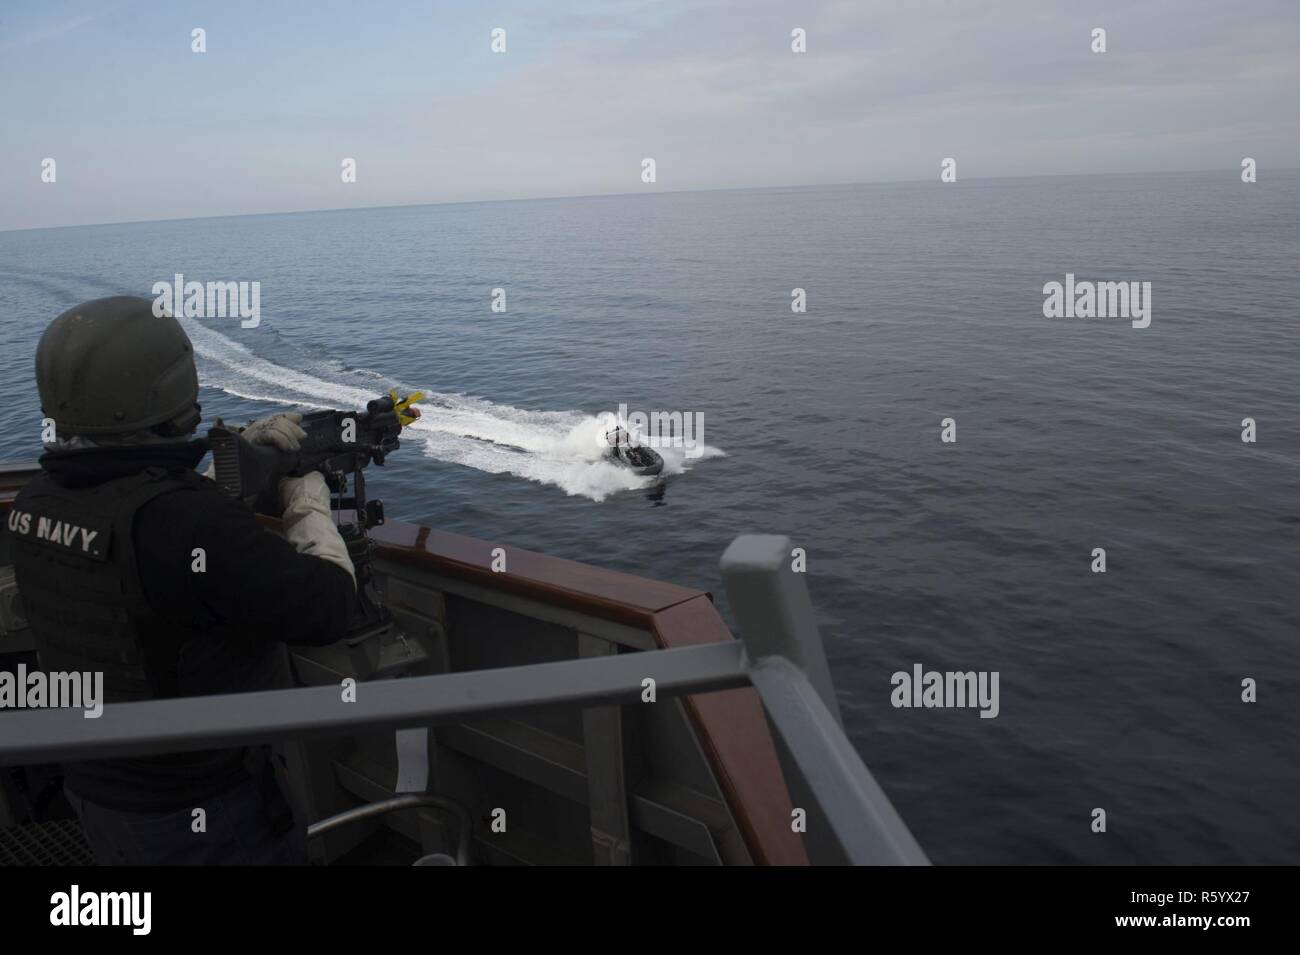 ATLANTIC OCEAN (April 20, 2017) - Gunner's Mate 2nd Class Cody Waliszewski mans a M240B machine gun aboard USS Carney (DDG 64) and repels a simulated hostile small craft while participating in Flag Officer Sea Training in the Atlantic Ocean April 20, 2017. Carney, an Arleigh Burke-class guided-missile destroyer, forward-deployed to Rota, Spain, is conducting its third patrol in the U.S. 6th Fleet area of operations in support of U.S. national security interests in Europe. Stock Photo